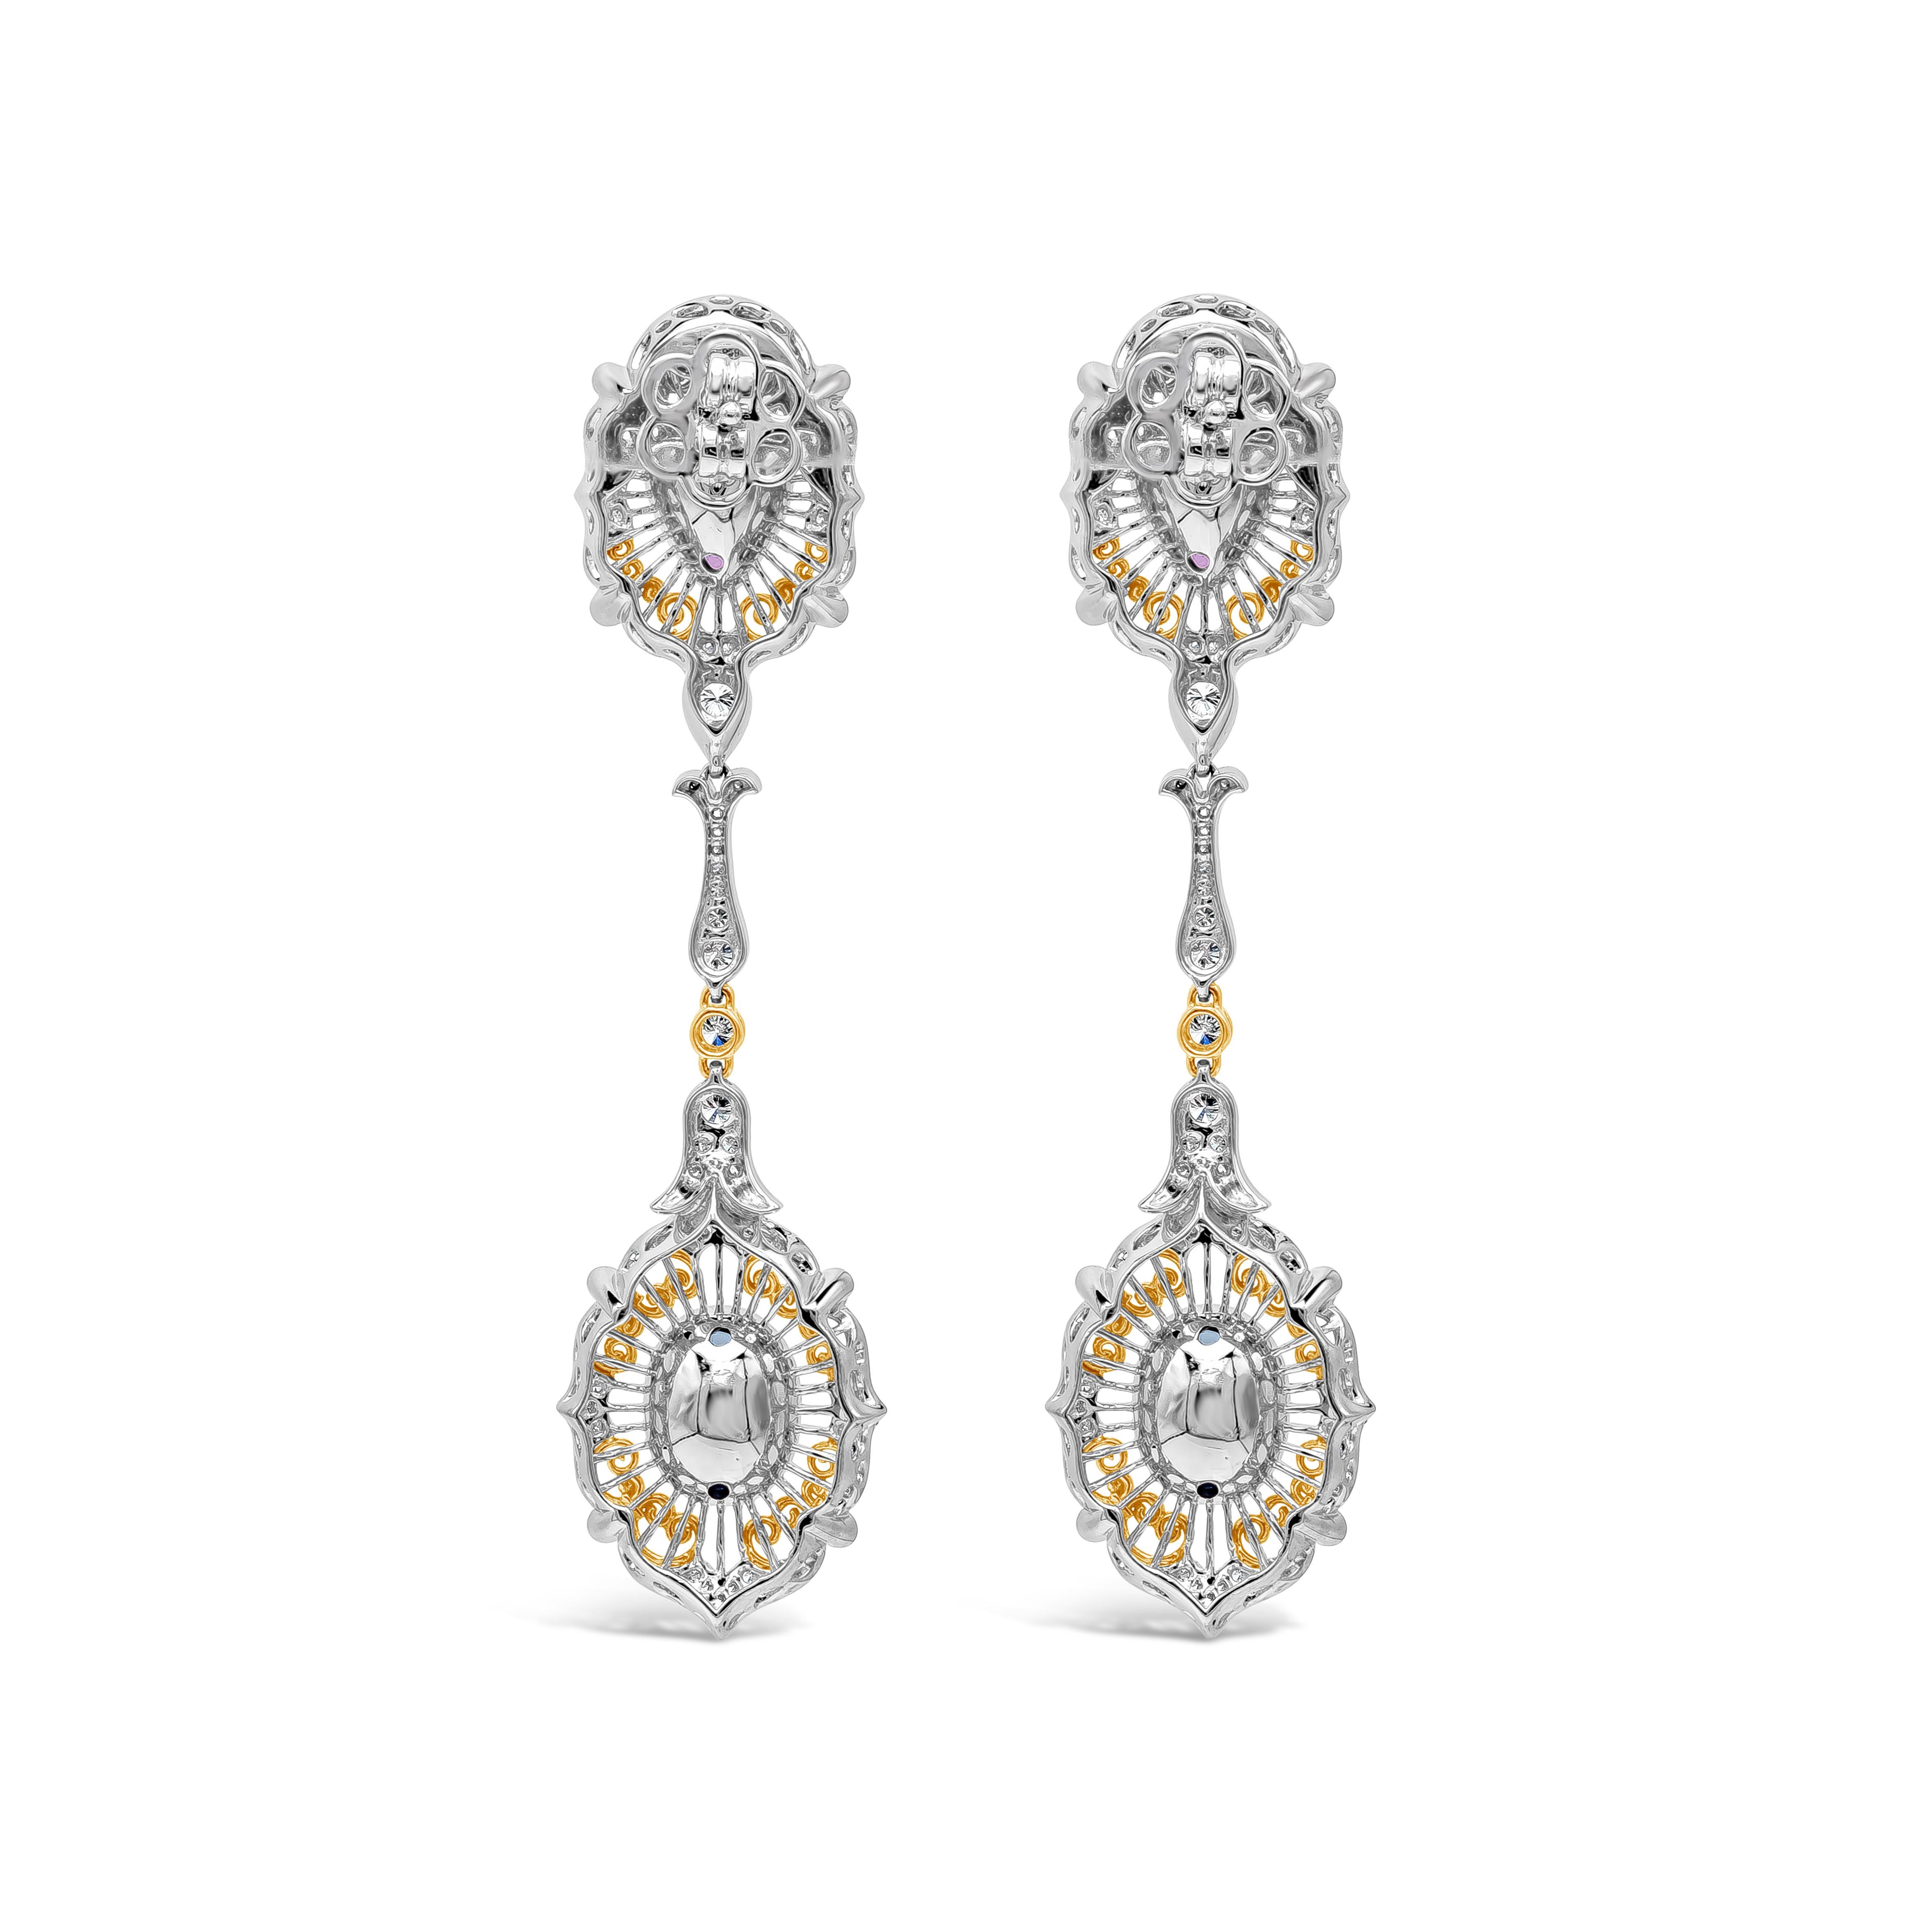 A beautiful and unique pair of dangle earrings. Each earring showcases a pink and blue oval cut sapphires, set in an intricately-designed mounting accented with diamonds. Pink sapphires weigh 2.86 carats; blue sapphires weigh 2.87 carats total;